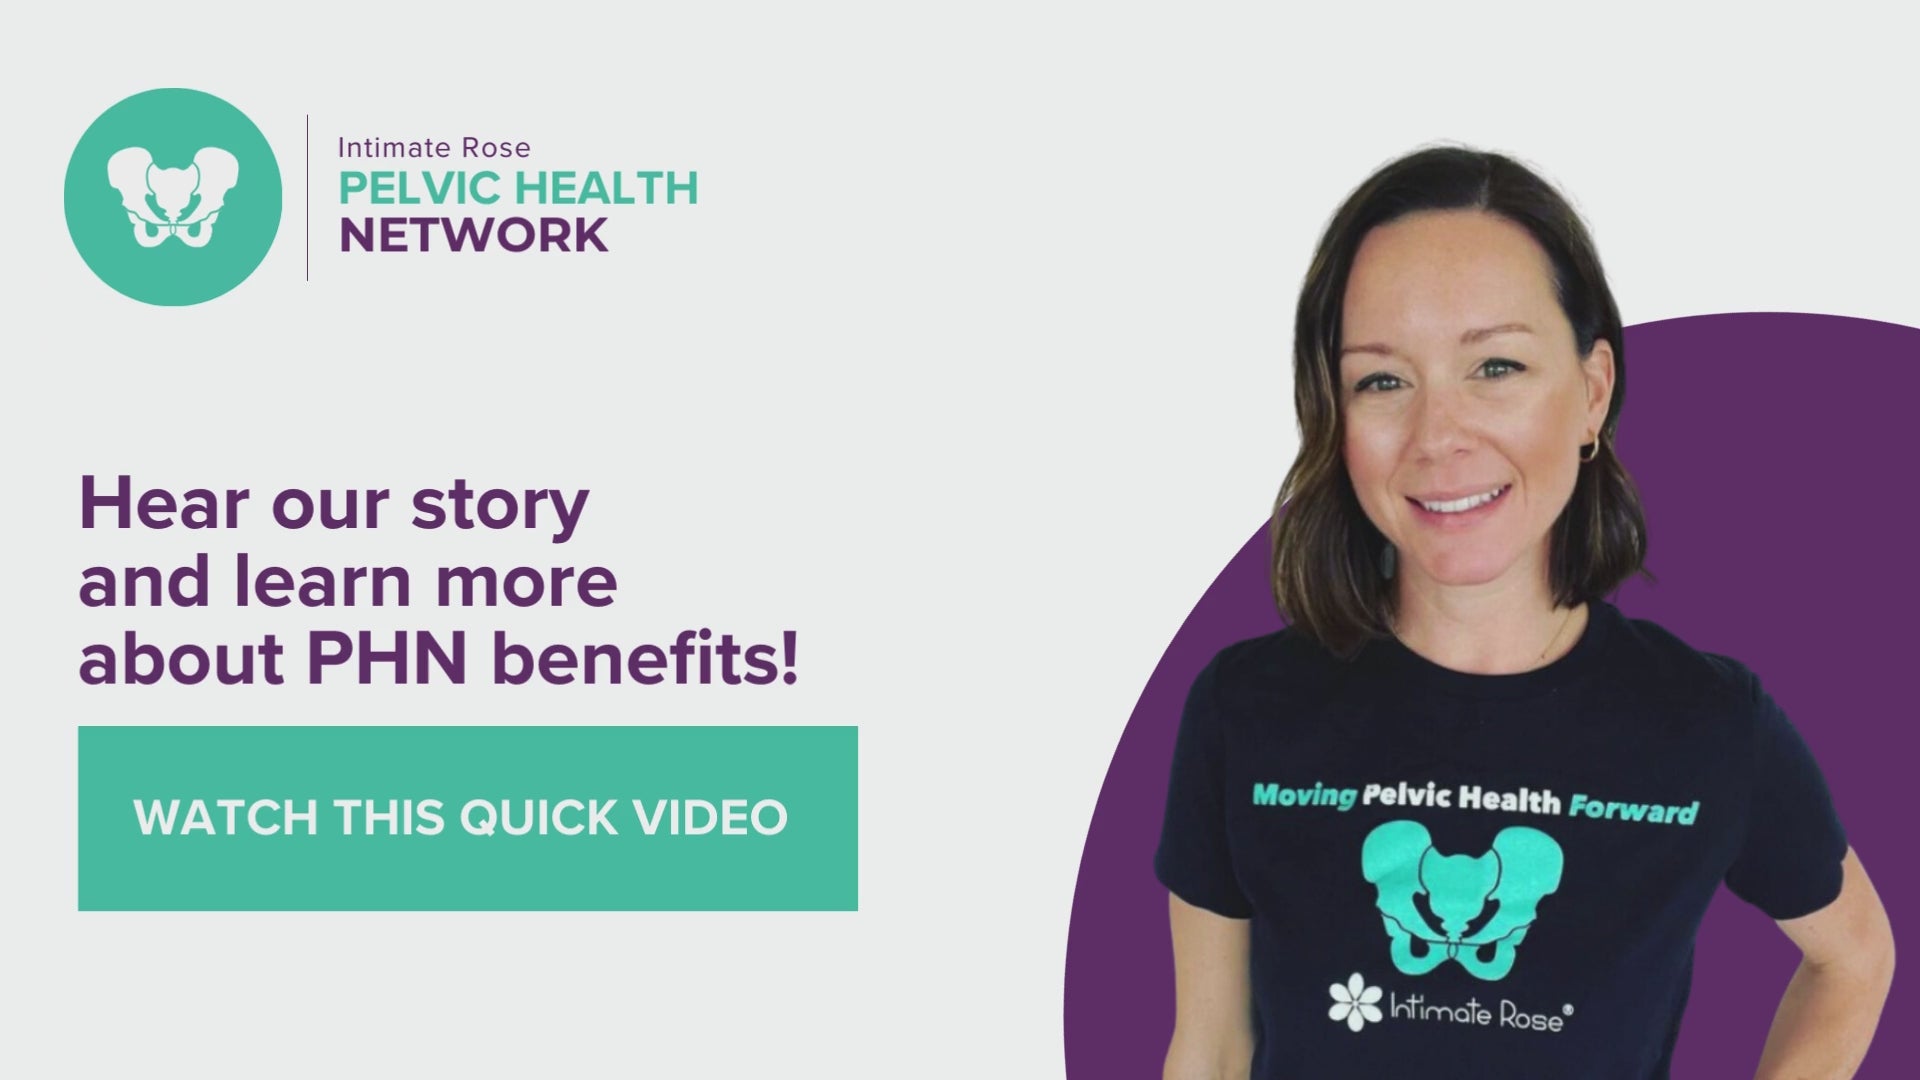 Load video: Join the Pelvic Health Network